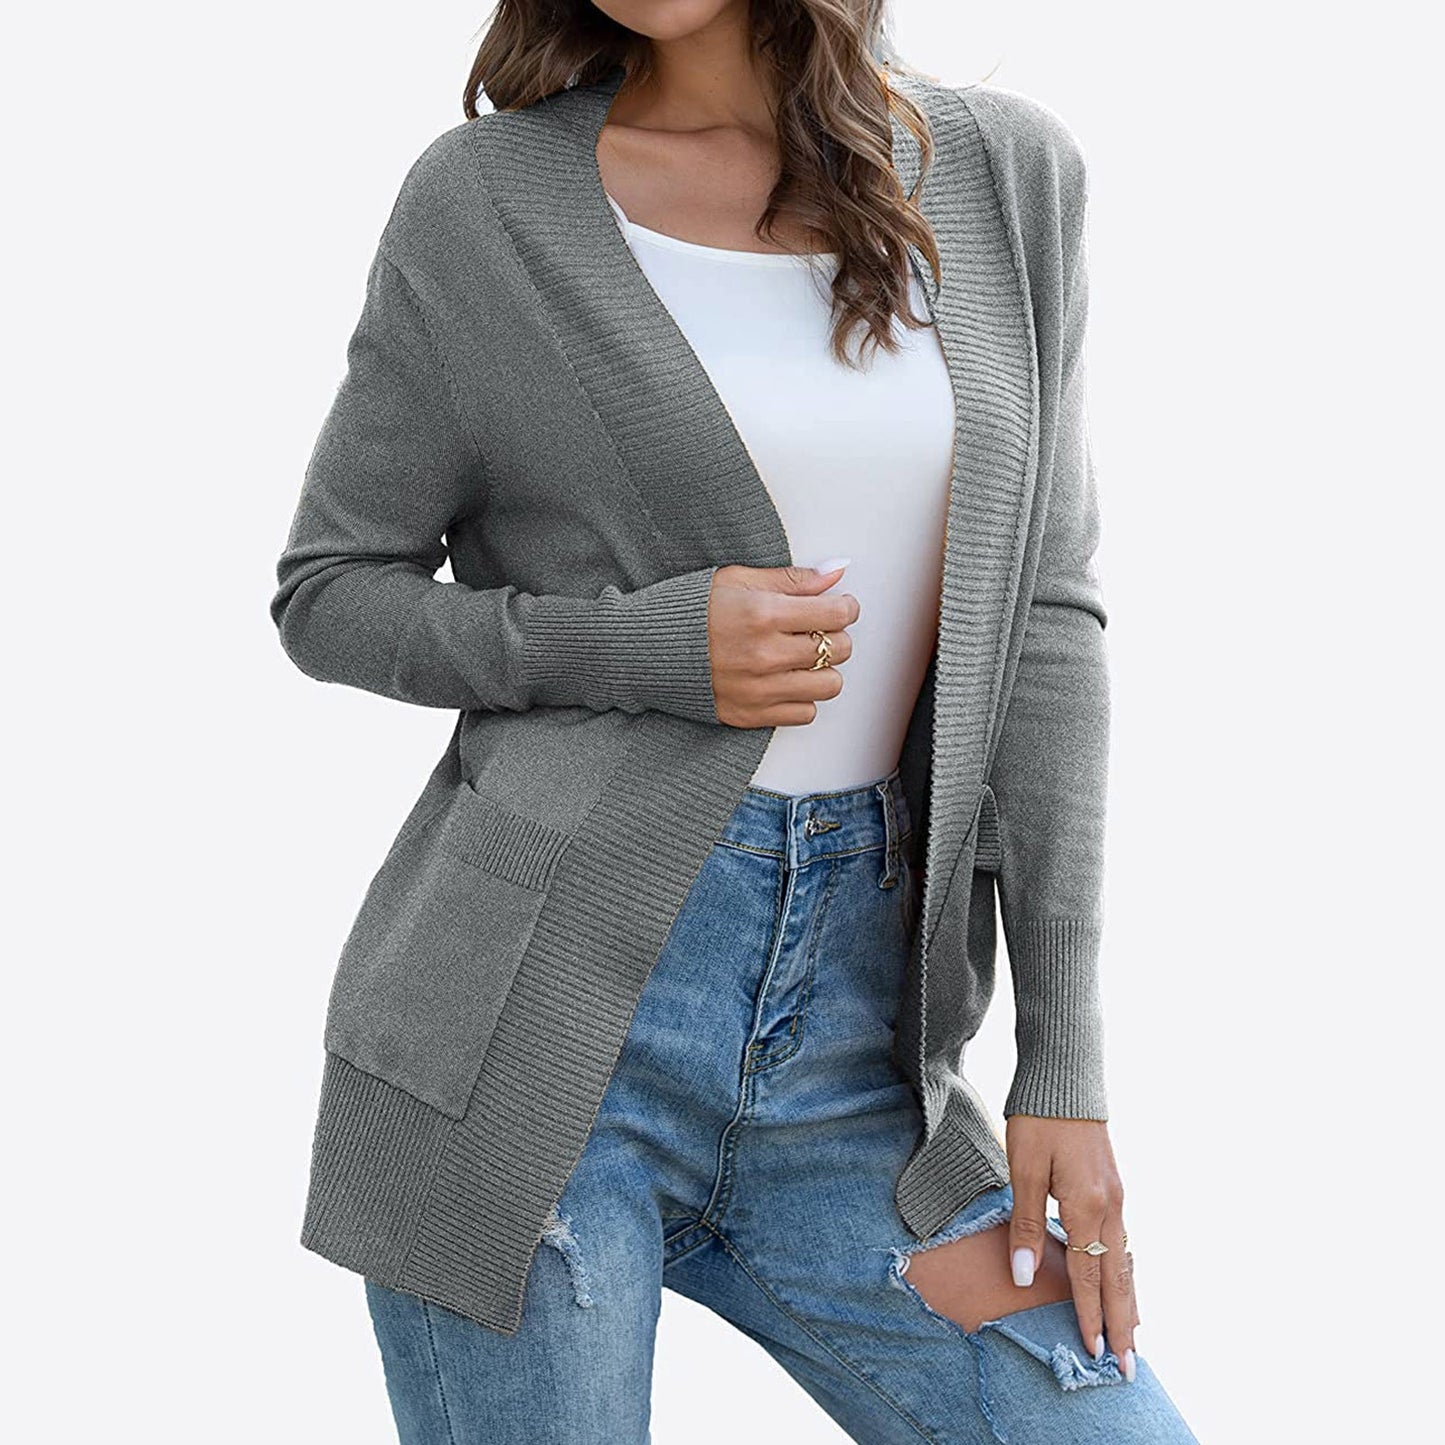 Lightweight Open Front Cardigan Sweater With Pockets - Fashion Damsel